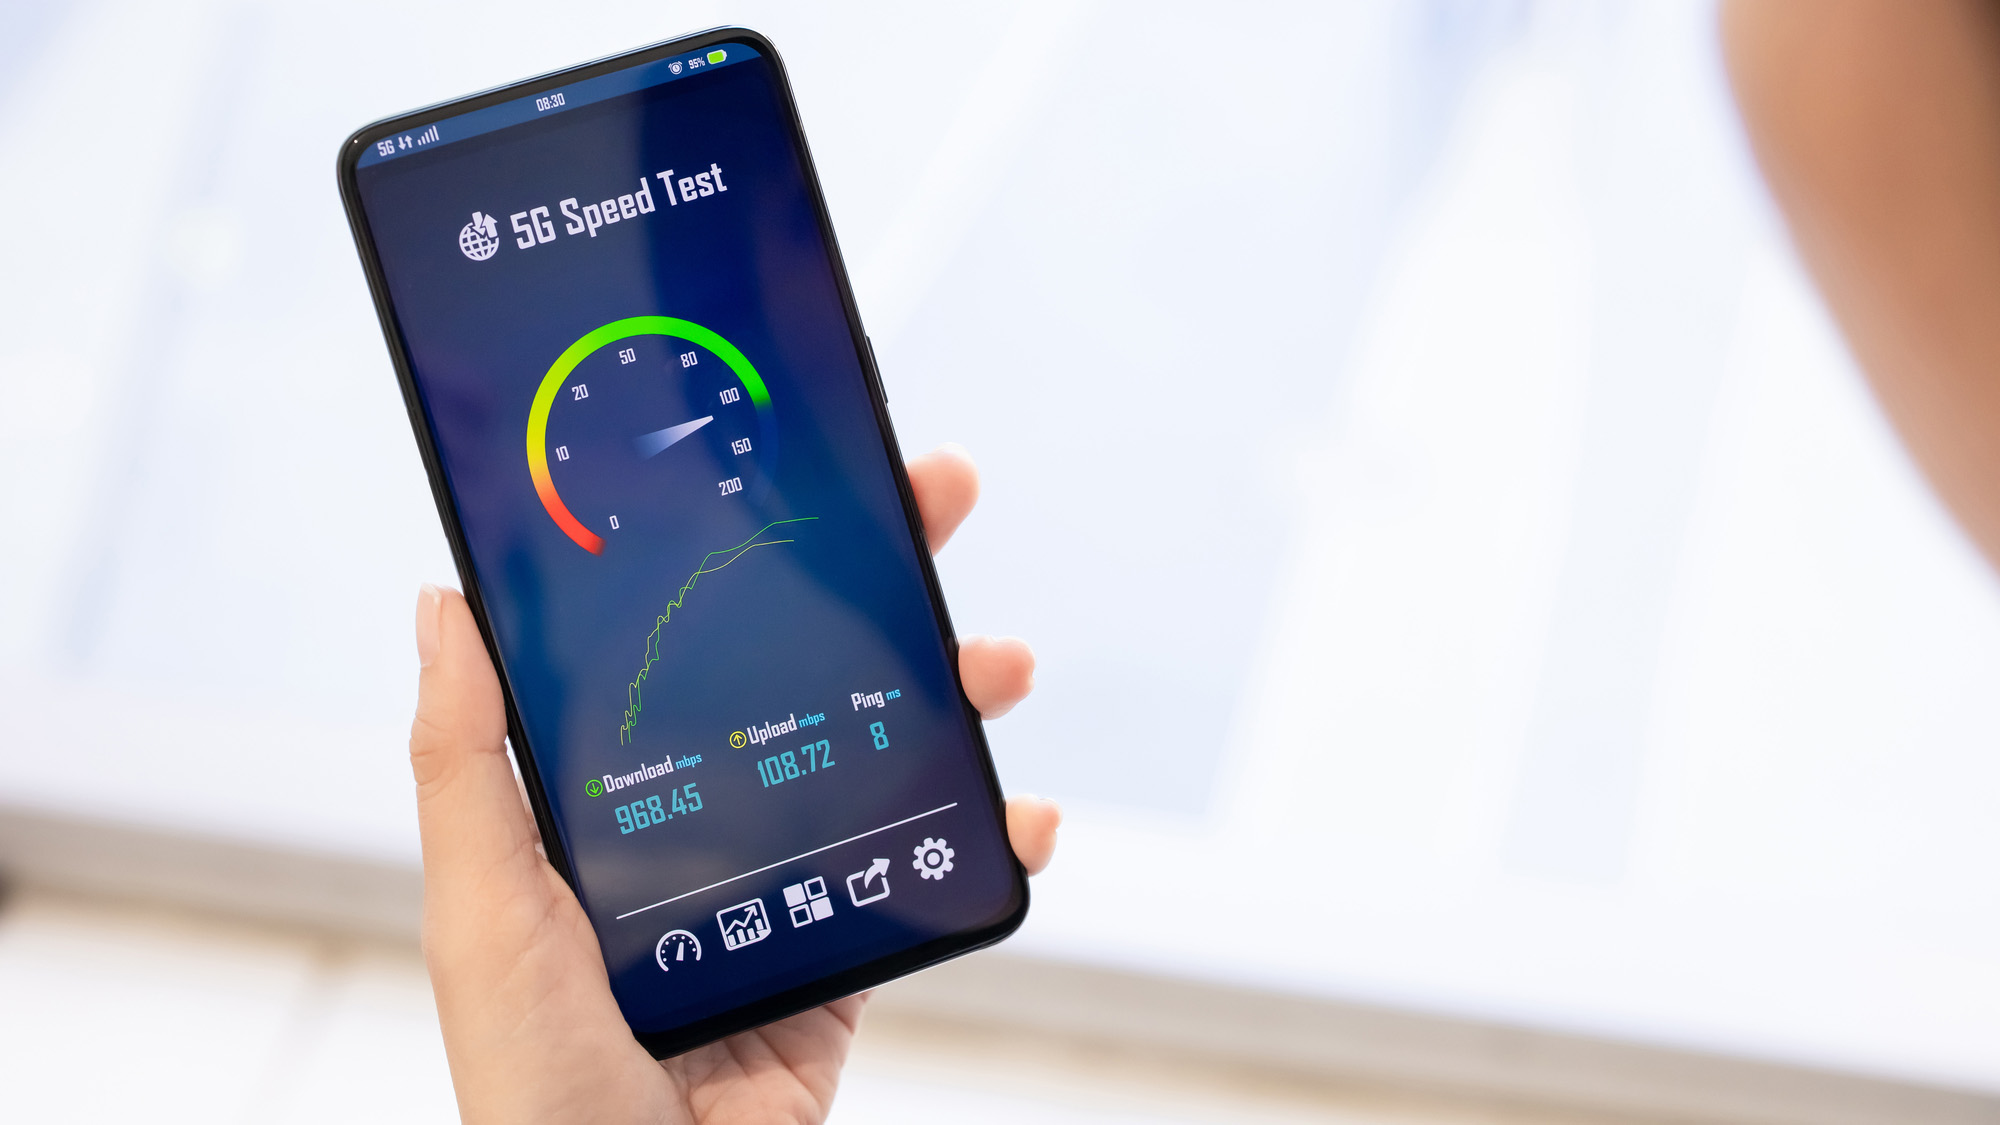 How to Accurately Test and Improve Mobile Speed